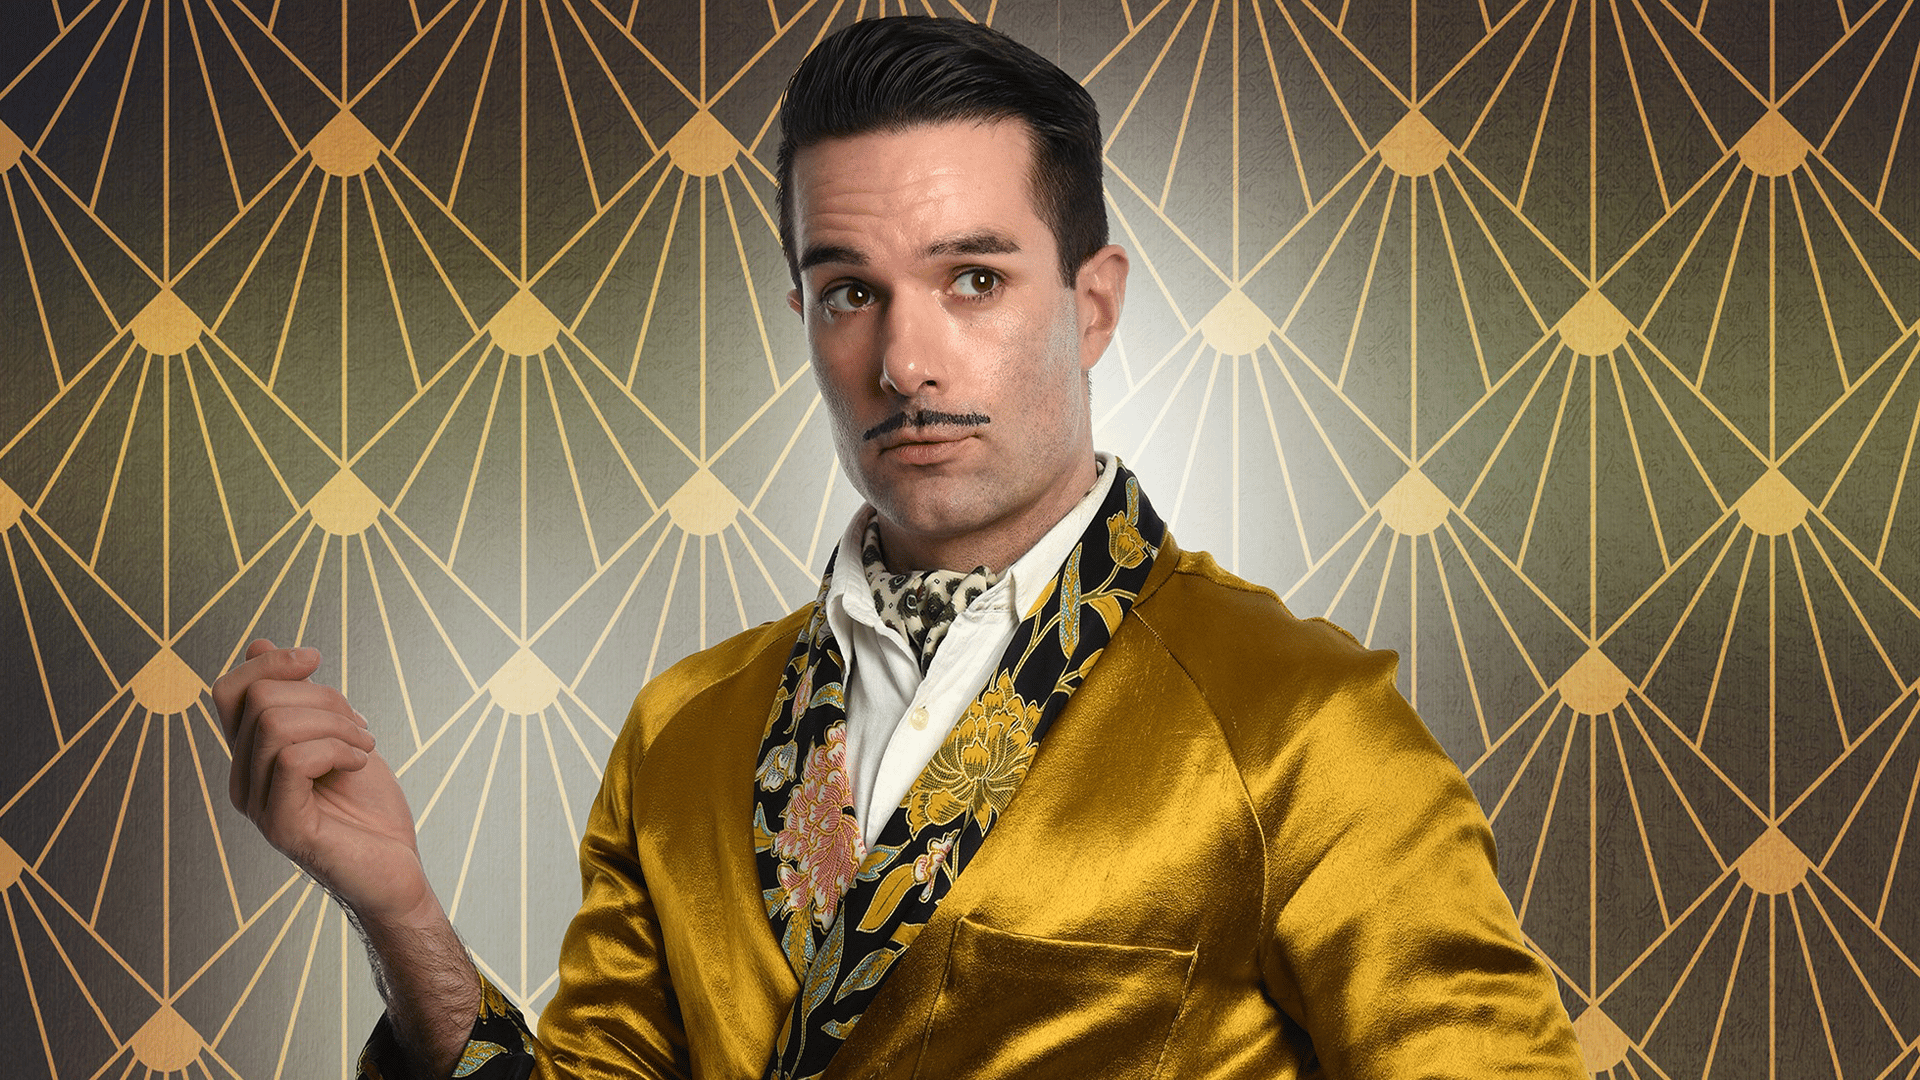 Troy Hawke wearing a golden silk dressing gown, holding his right arm up at shoulder height and looking off towards the left. His dark hair is very neat and he has a pencil moustache. The background is a black and gold 20's style wallpaper.